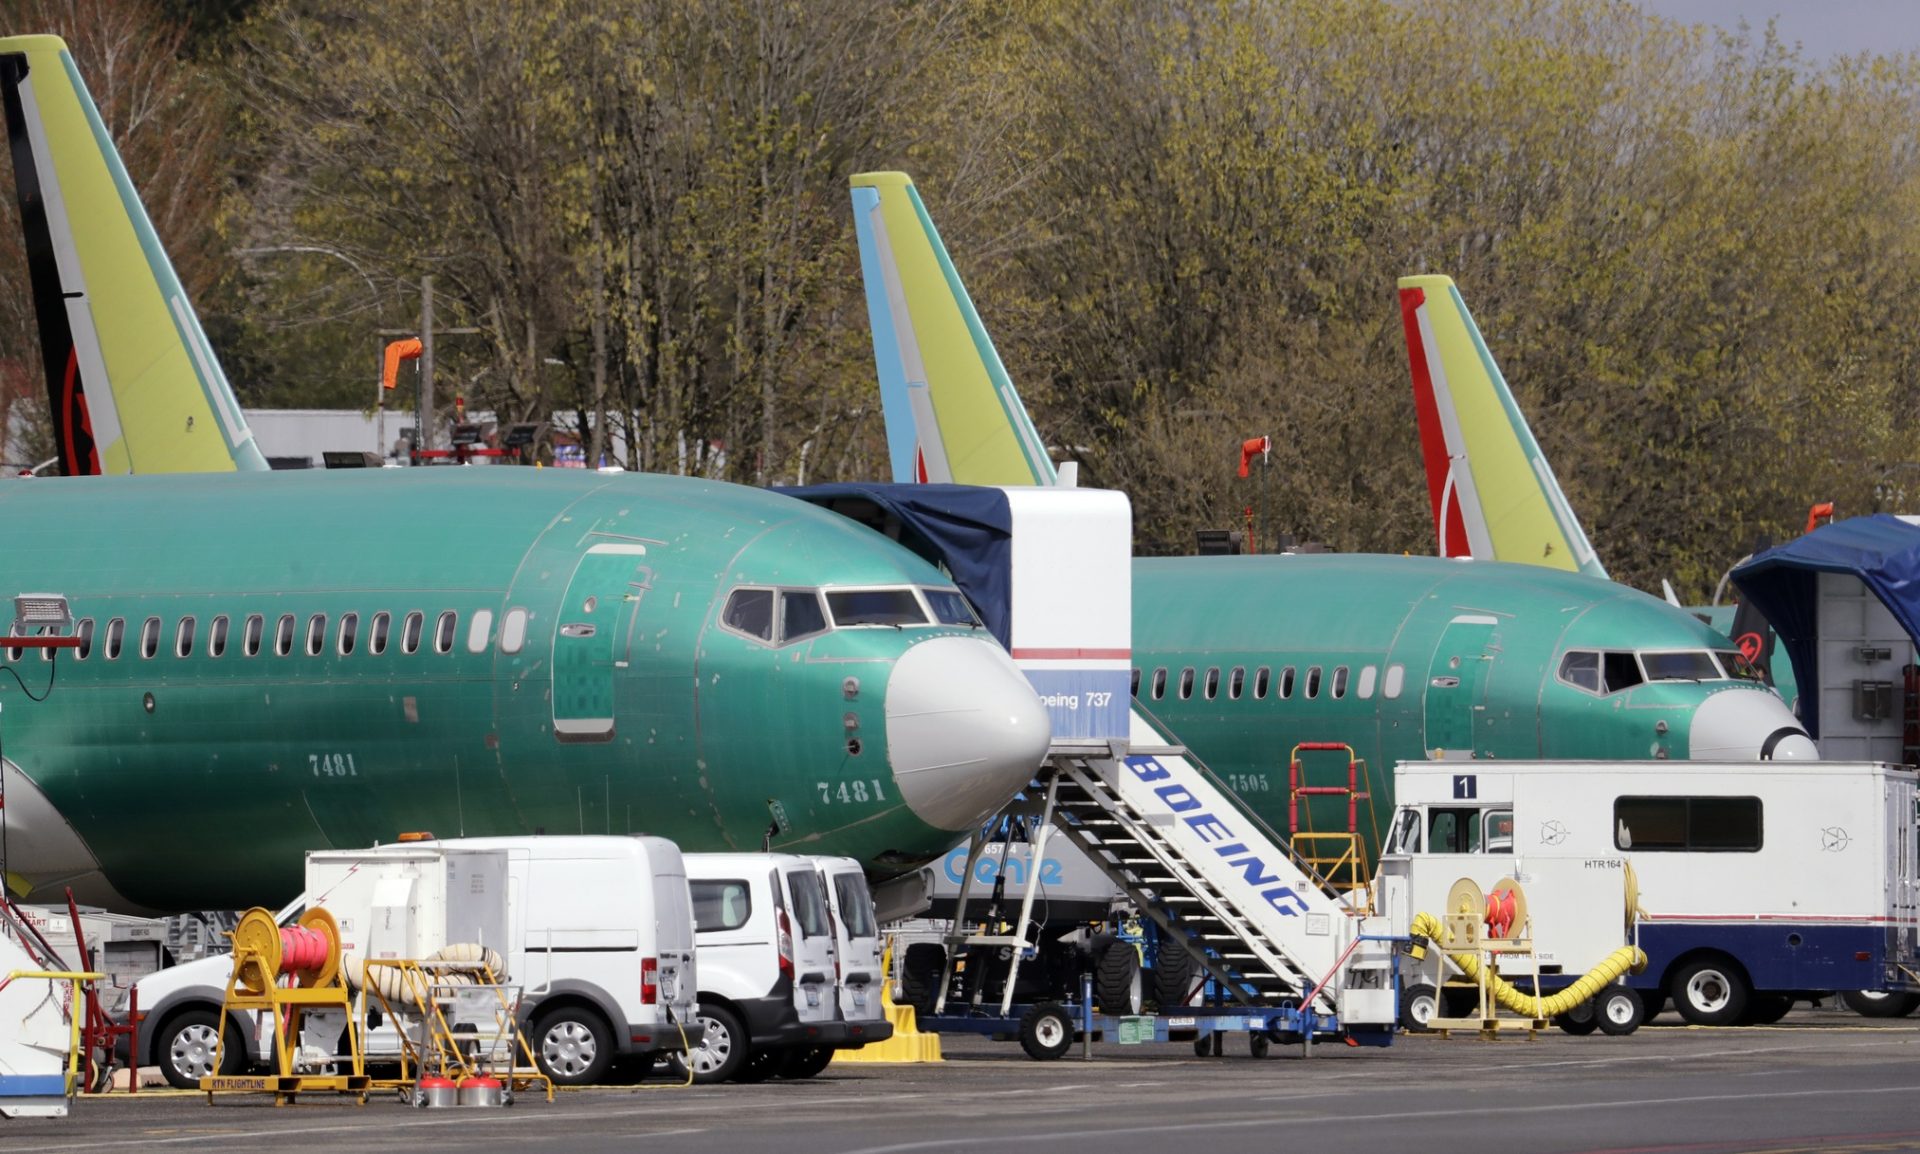 Boeing 737 Max 8 jets, built for American Airlines, left, and Air Canada are parked at the airport adjacent to a Boeing Co. production facility, Monday, April 8, 2019, in Renton, Wash. Boeing said the week before that it will cut production of its troubled 737 Max airliner in April, underscoring the growing financial risk it faces the longer that its best-selling plane remains grounded after two crashes.